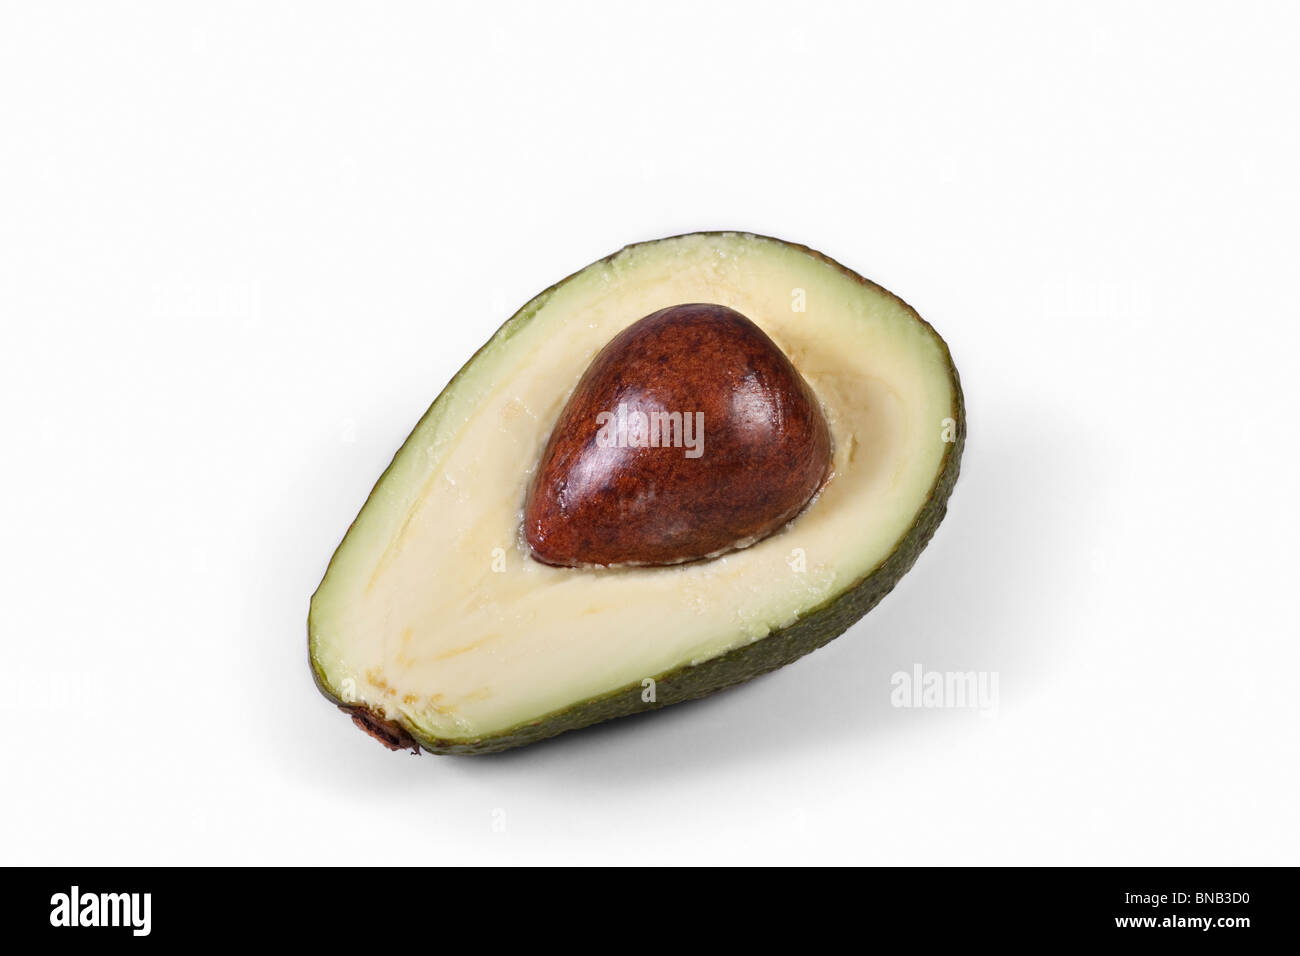 Cross section of a ripe Avocado Pear. Family: Lauraceae, Genus: Persea, Species: P. Americana. Isolated. Stock Photo